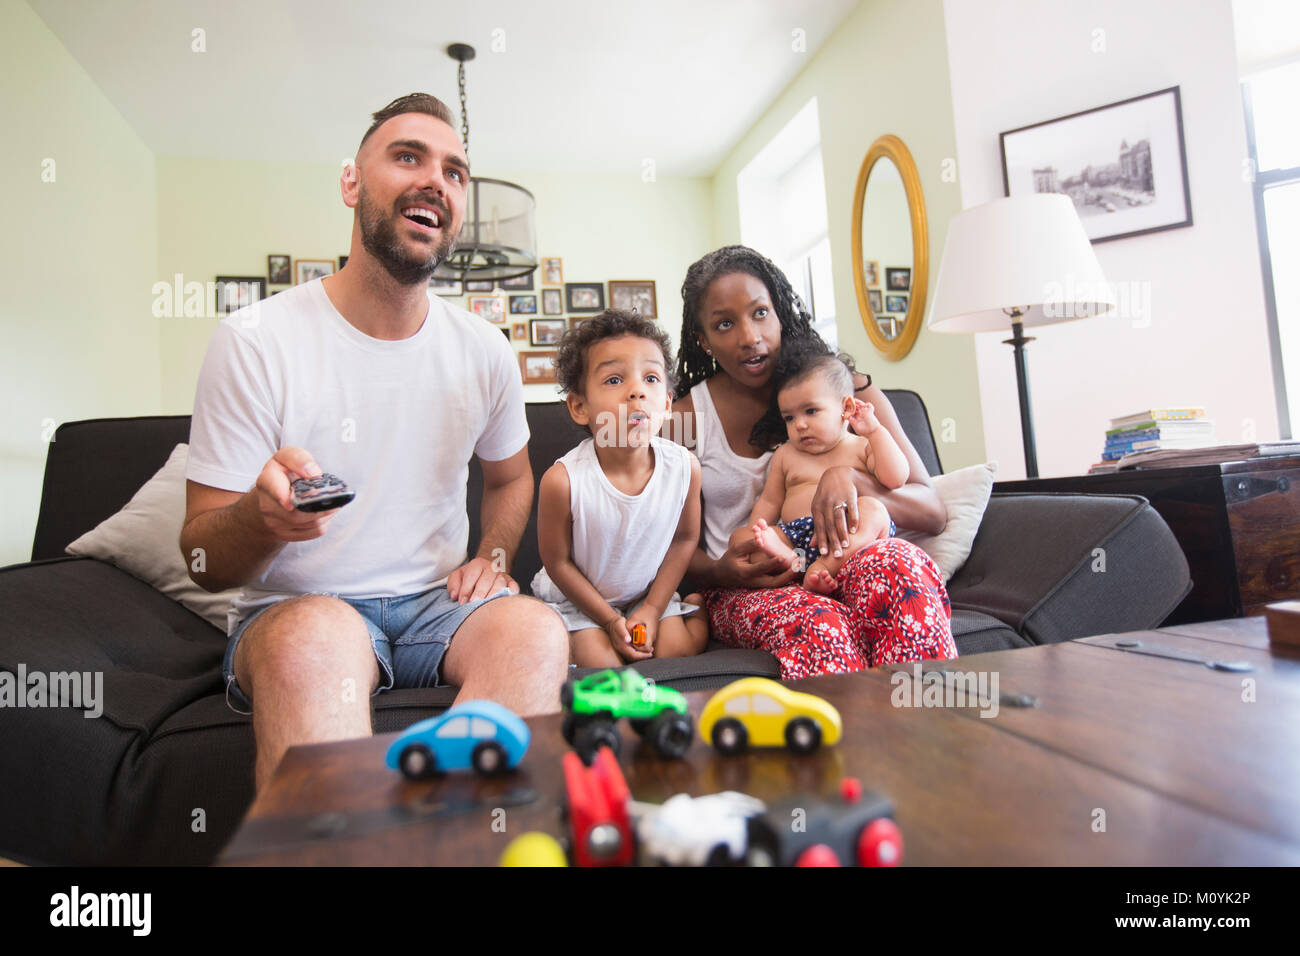 Parent watching television with son and daughter Stock Photo